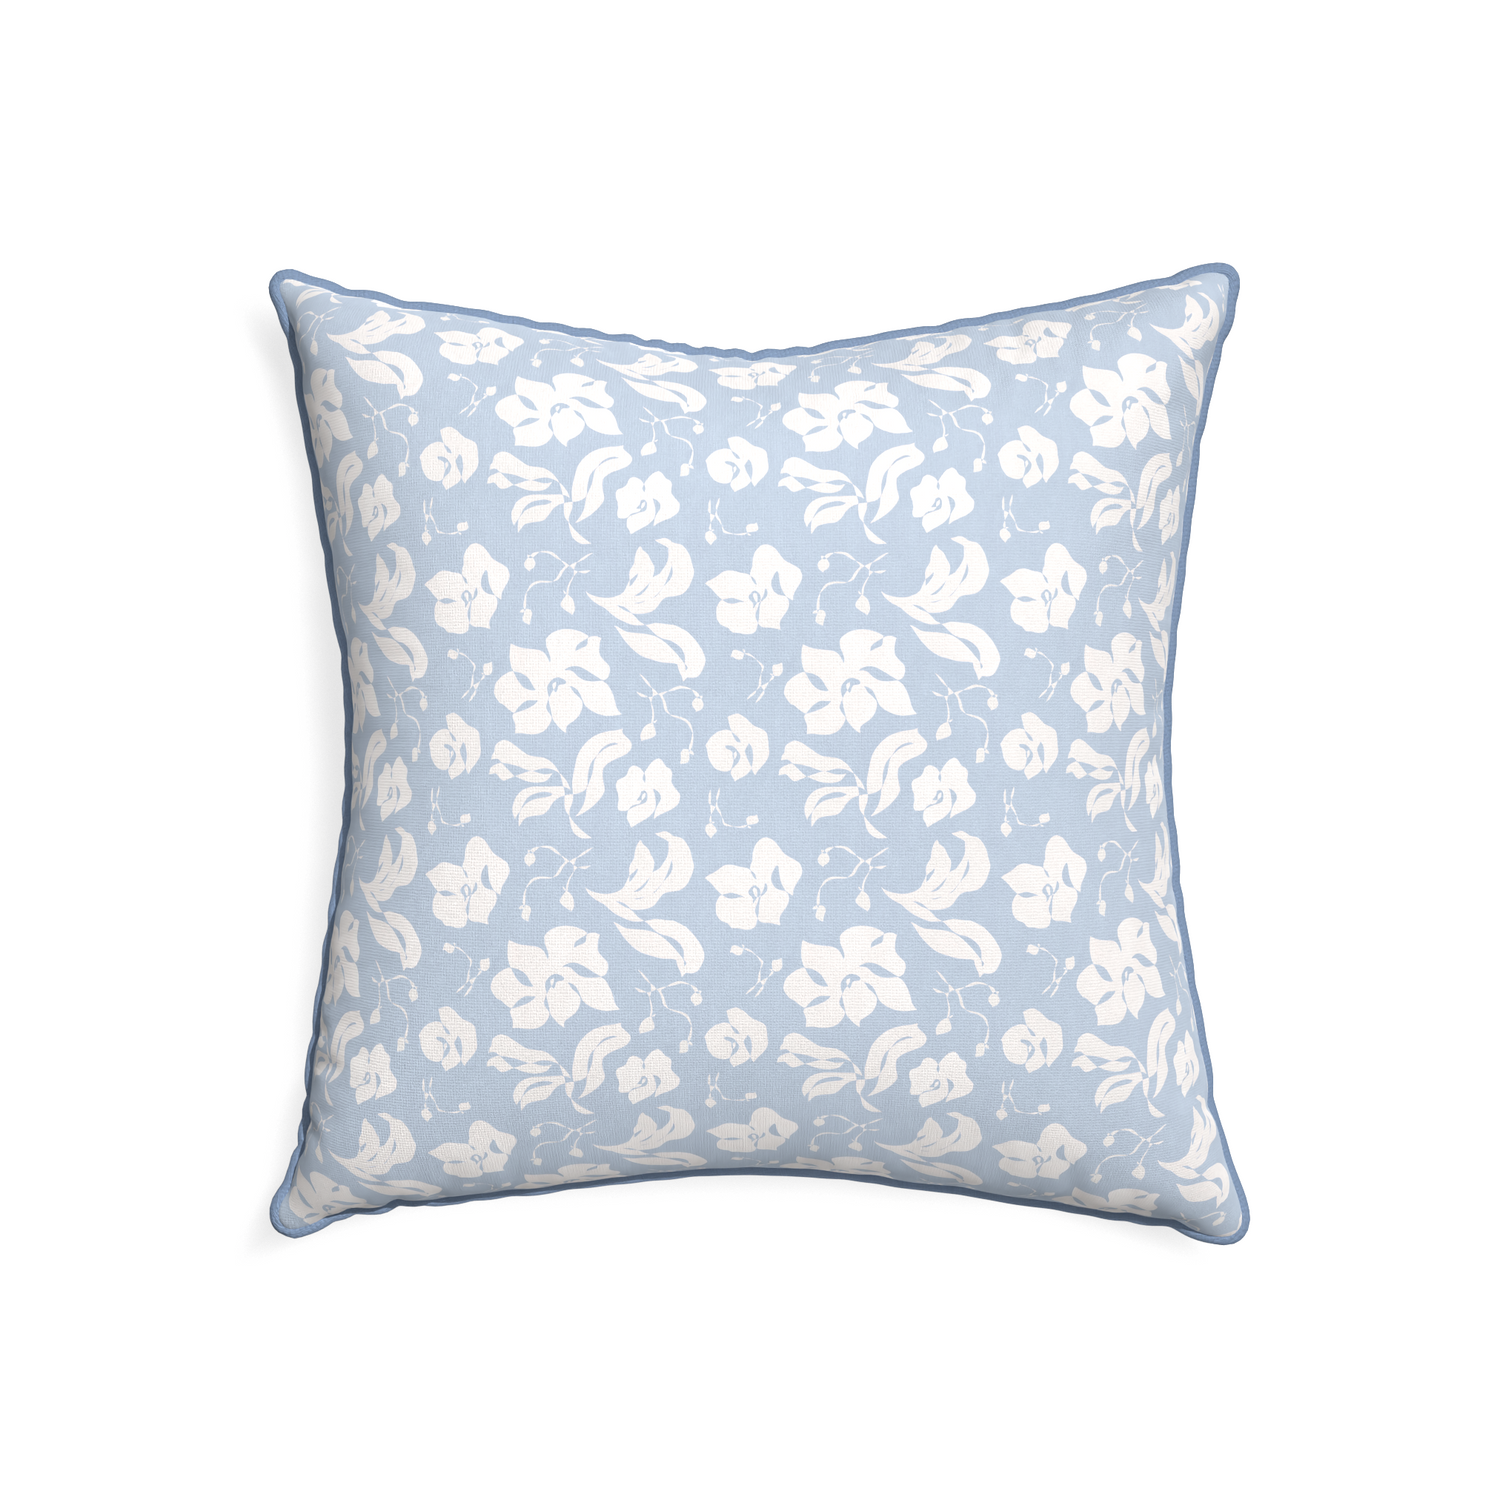 22-square georgia custom cornflower blue floralpillow with sky piping on white background